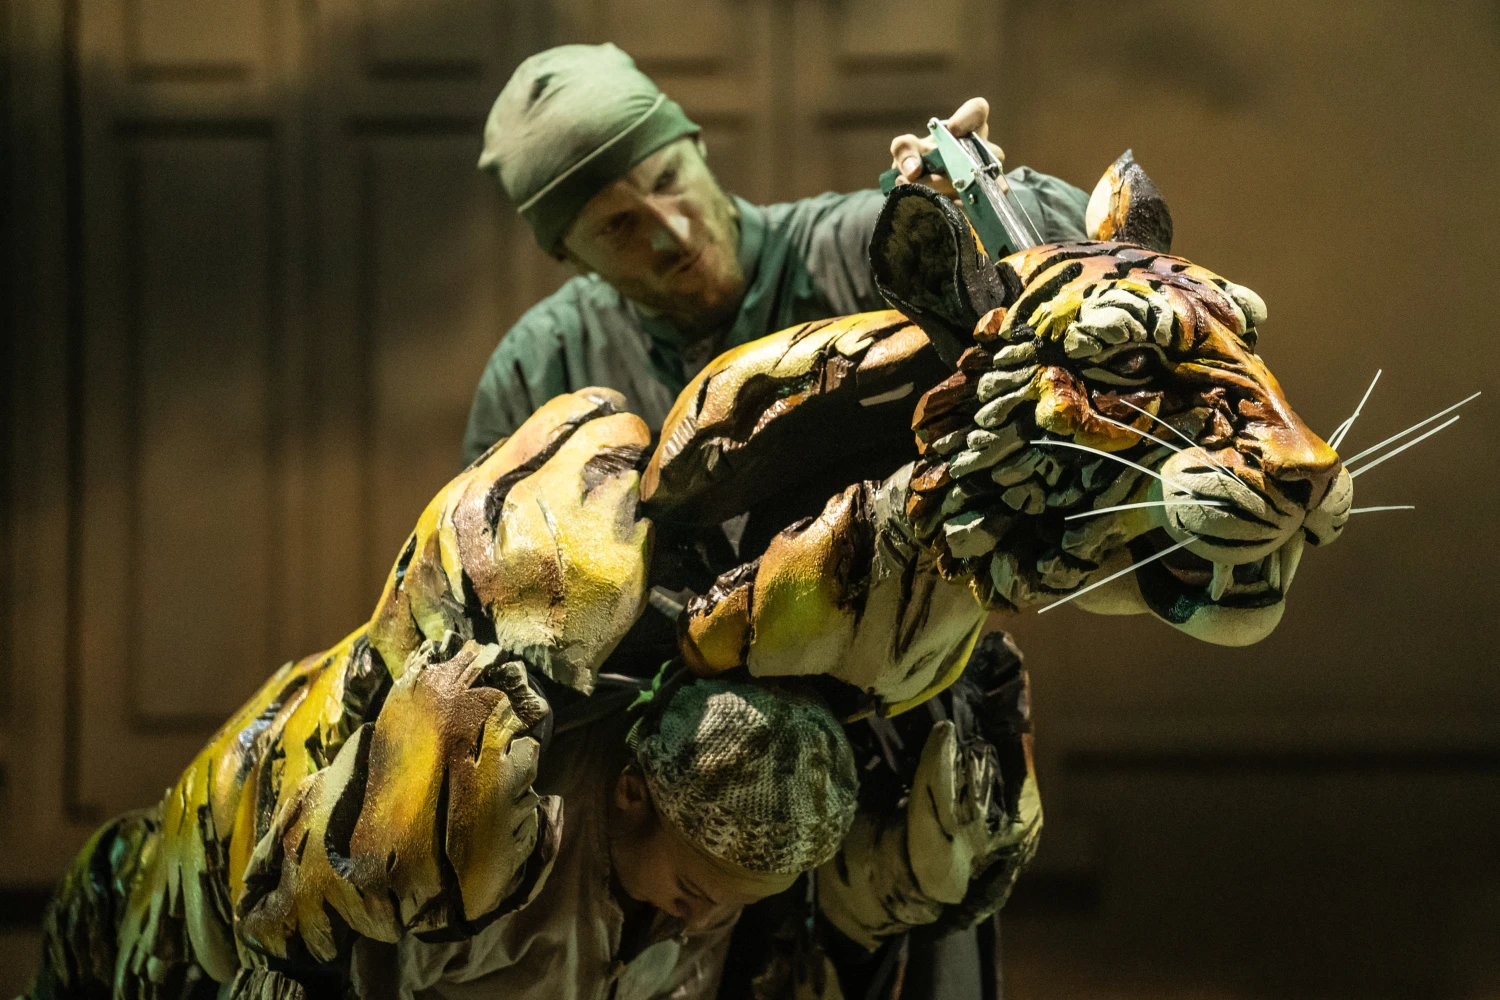 Life of Pi on Broadway: What to expect - 9